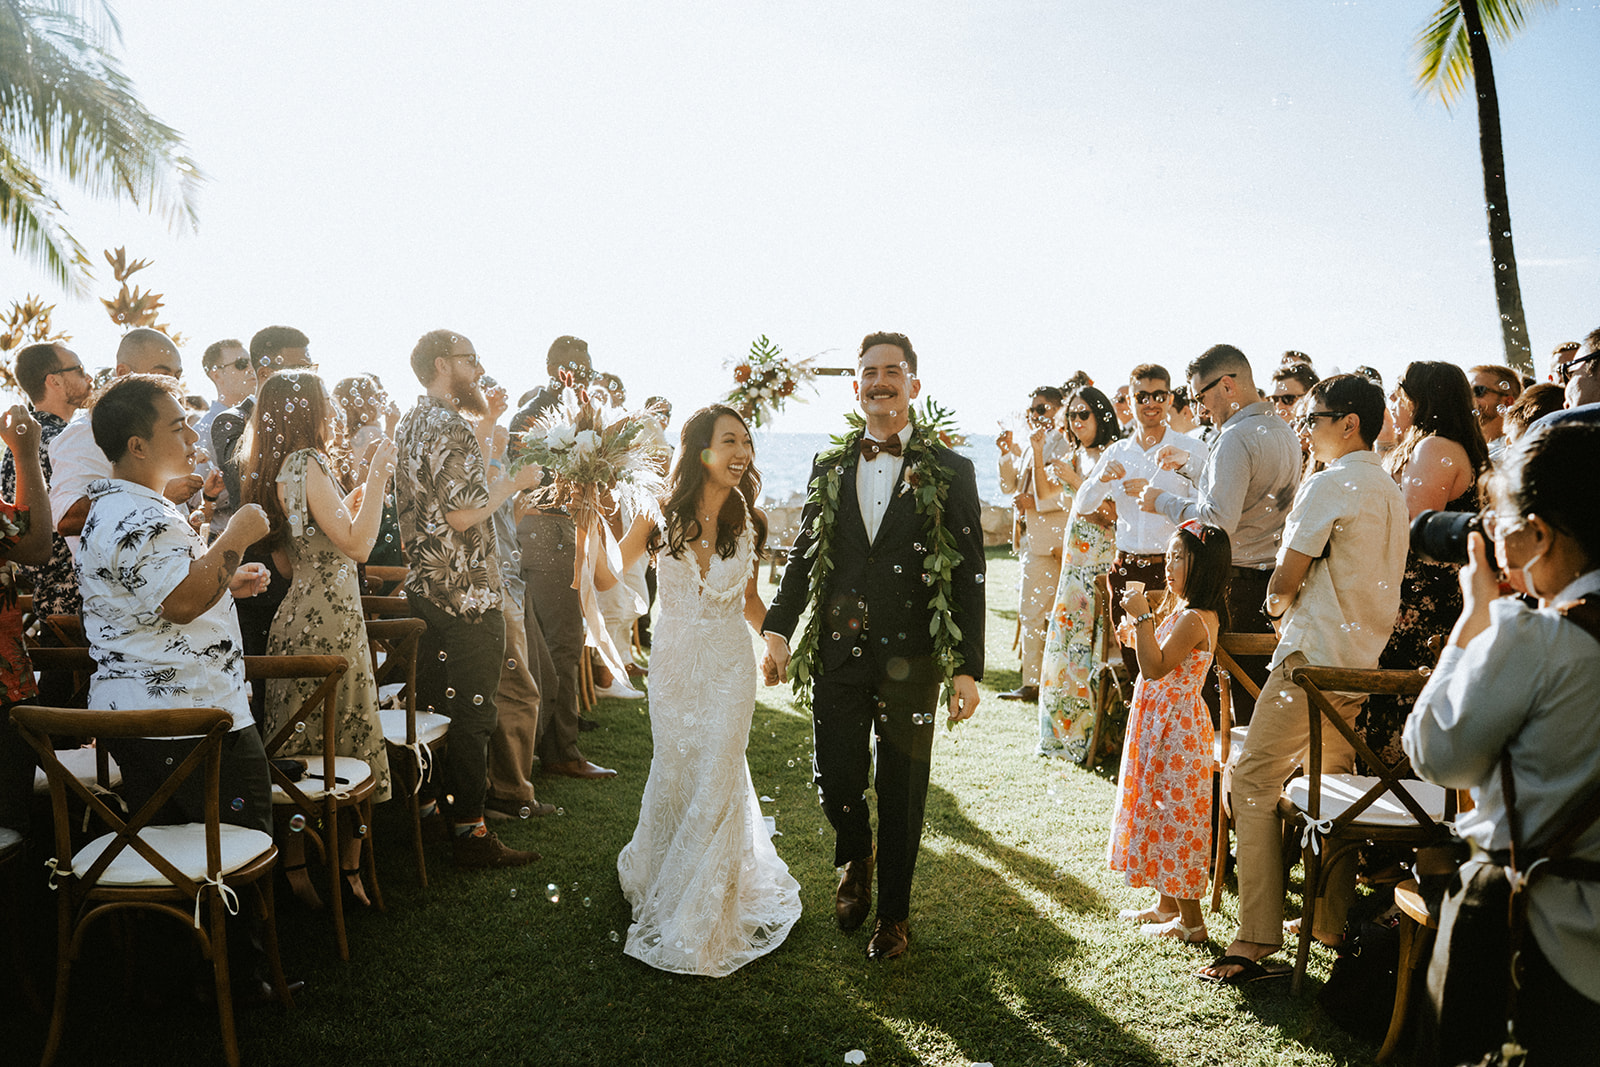 Bride and groom bubble send off at Lanikuhonua, Hawaii on a sunny day